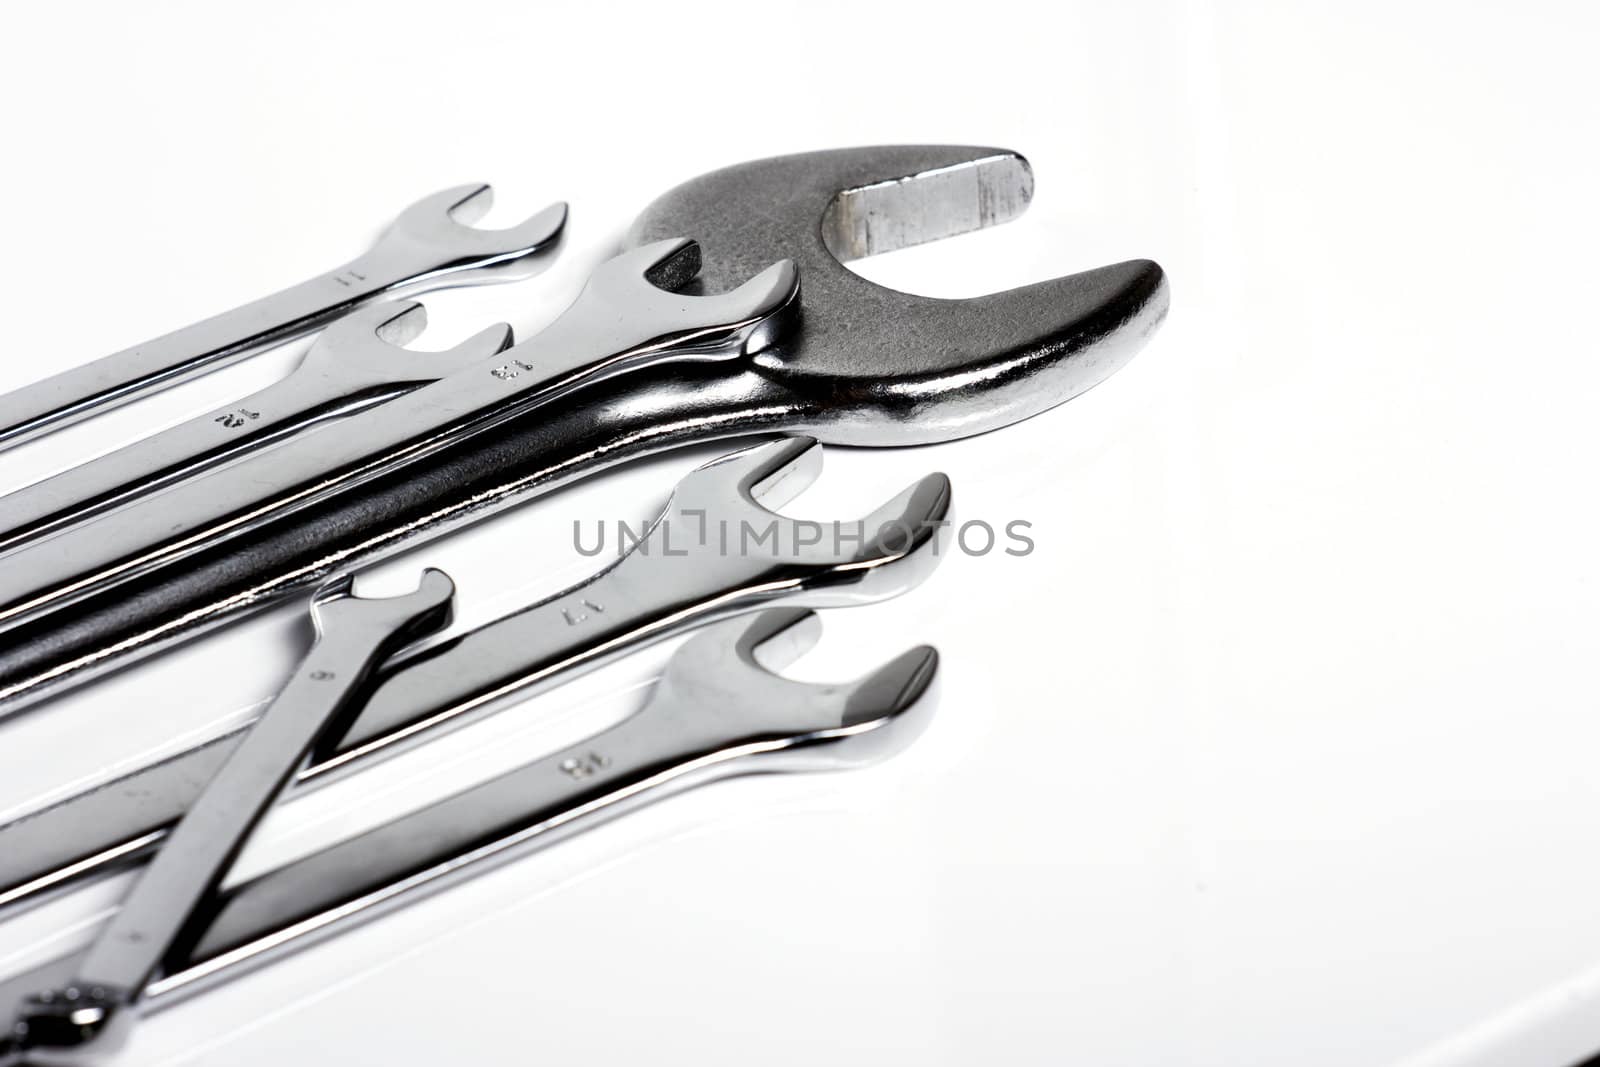 Some steel wrenches of different sizes on a white background